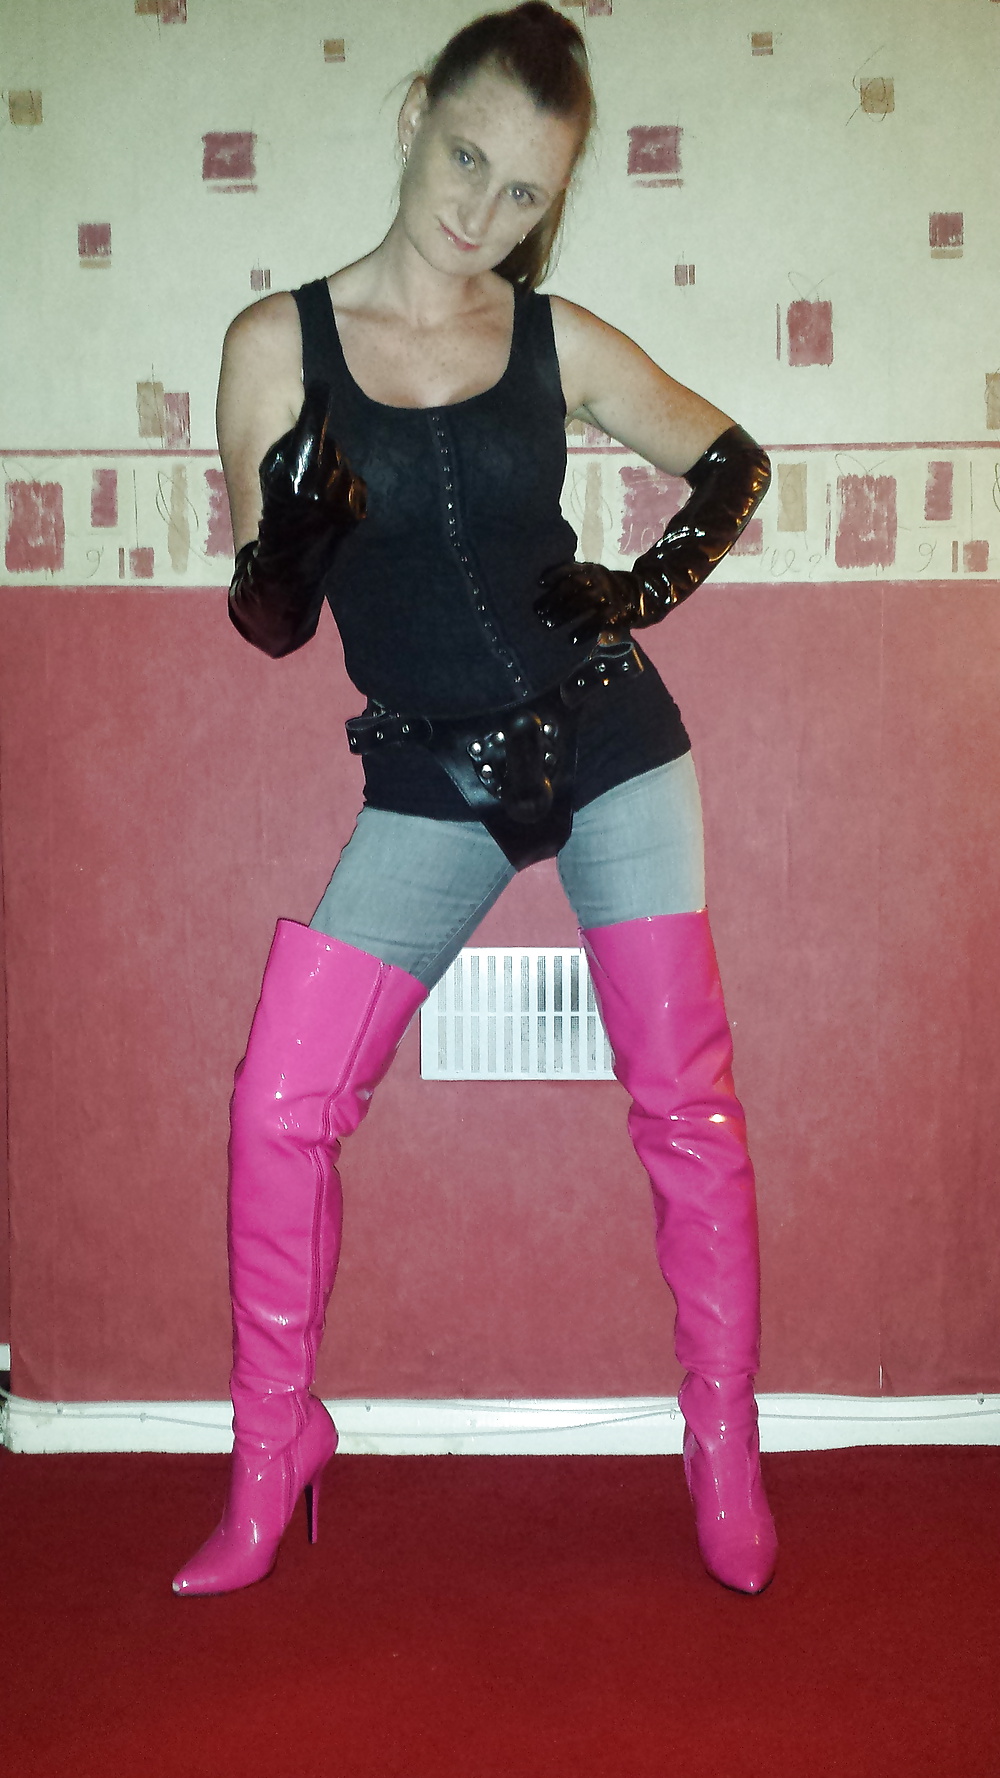 Strapon wearing mistress in pink thigh high boots #30016281